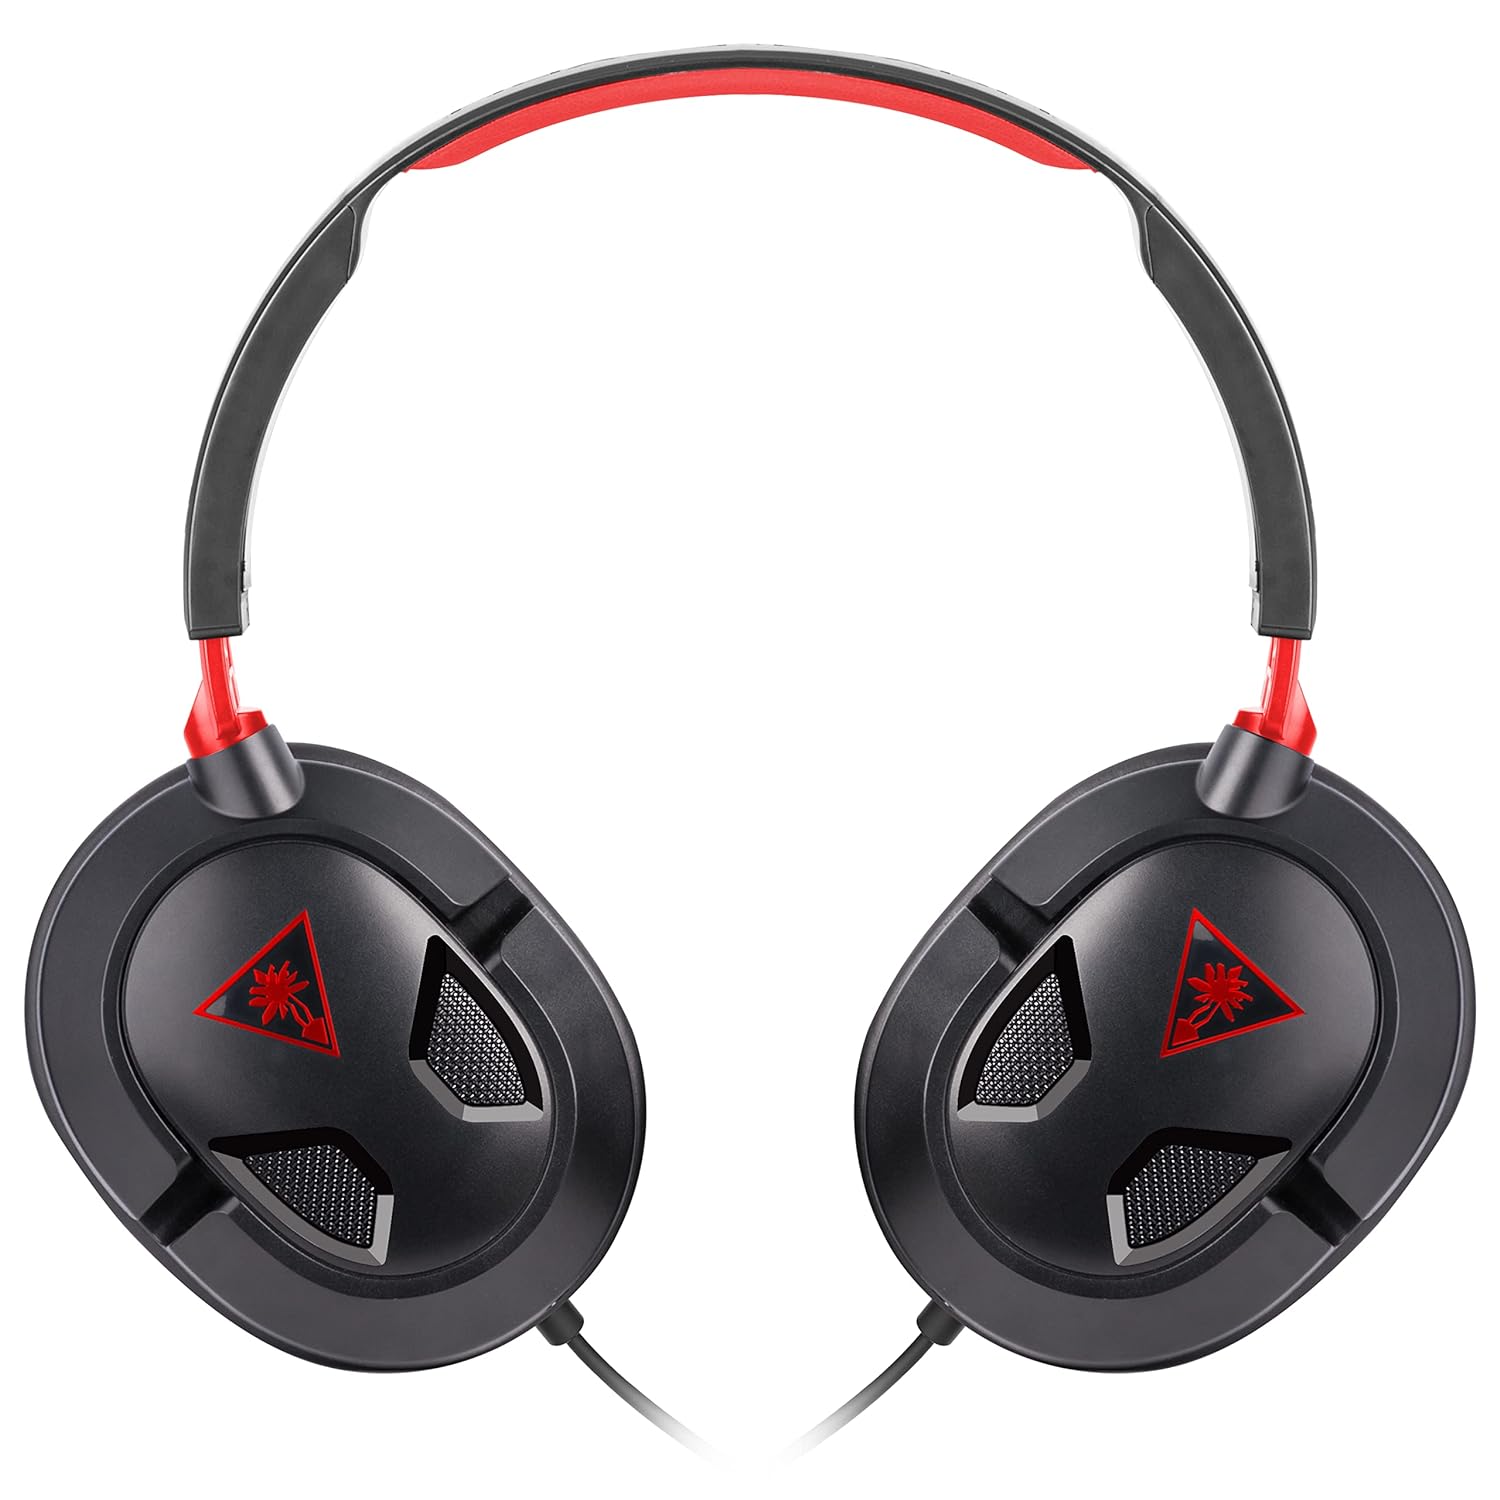 Turtle Beach Ear Force Recon 50 Gaming Headset for PlayStation 4, Xbox One, & PC/Mac - Geek Tech